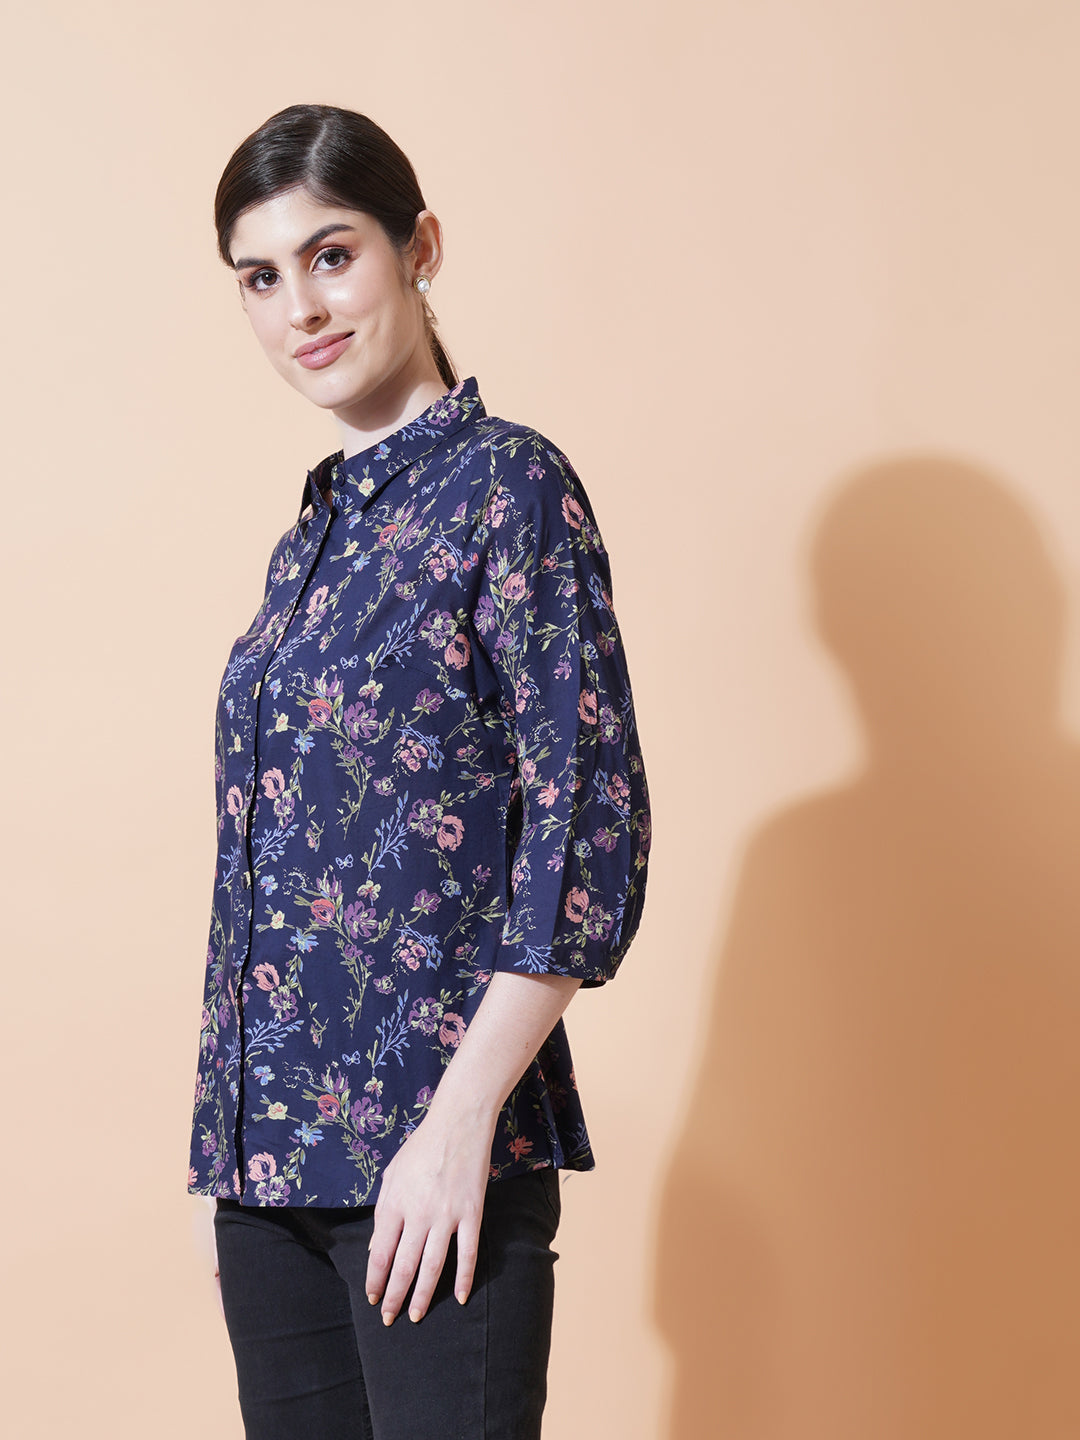 Women Navy Blue & Pink Floral Print Collared Shirt Style Top